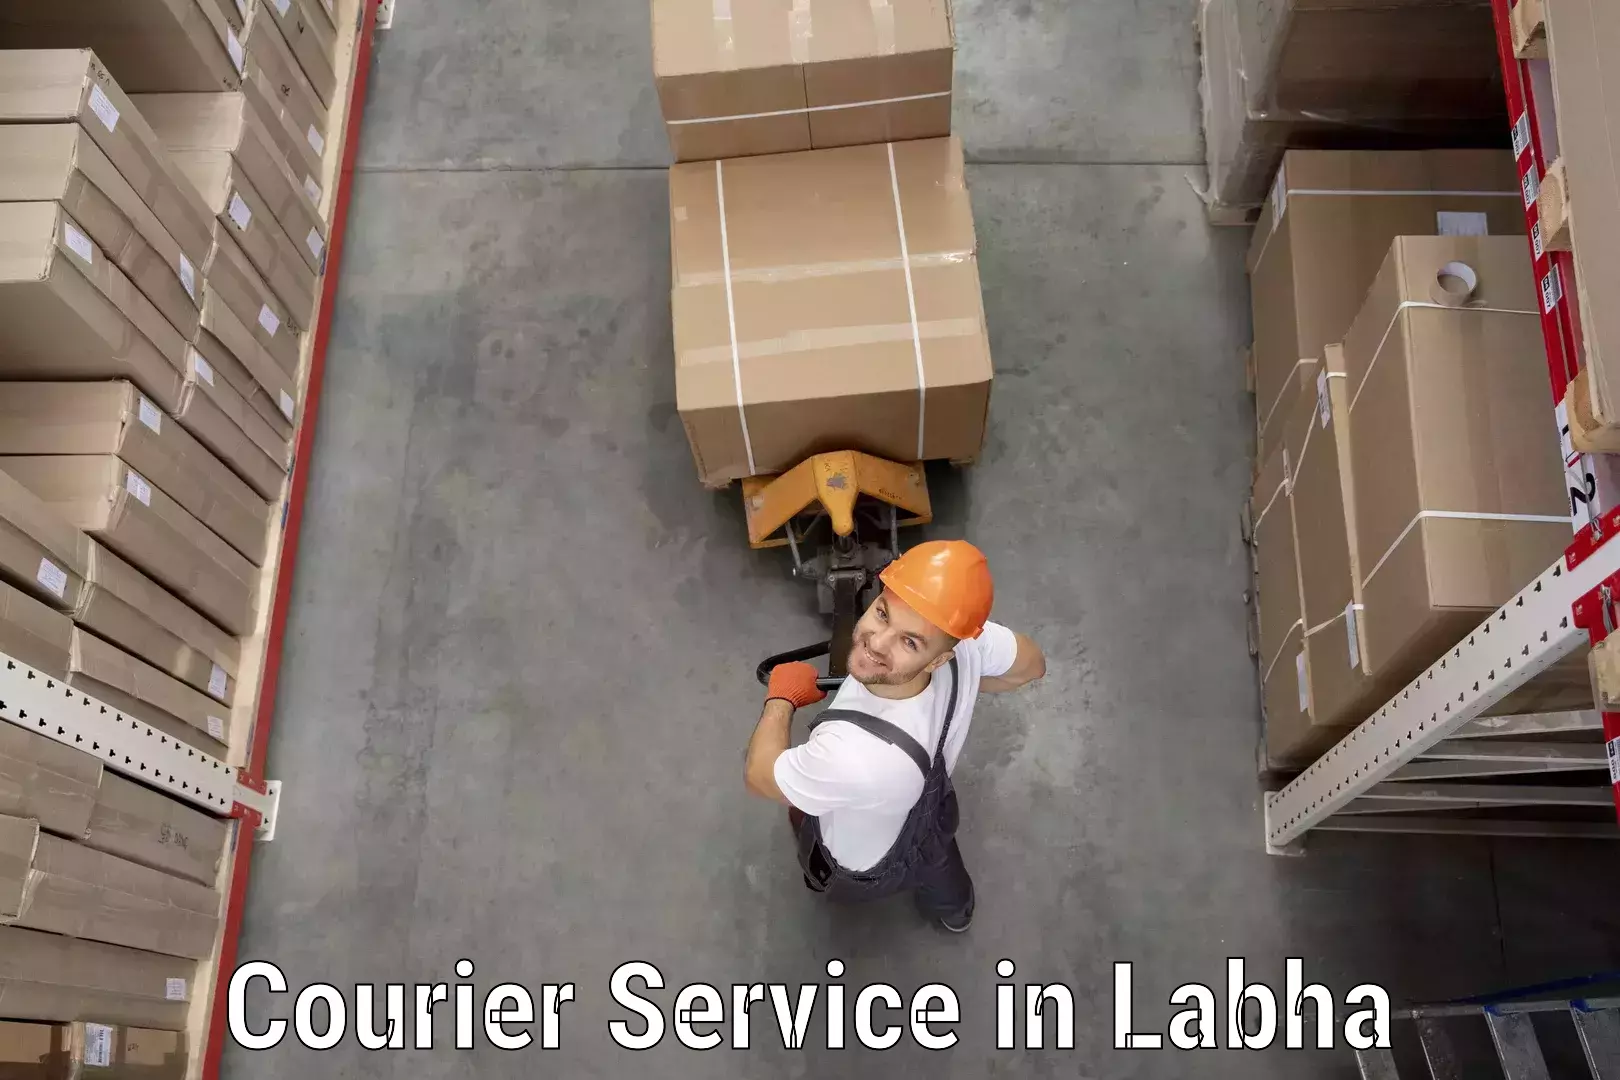 Dynamic courier services in Labha